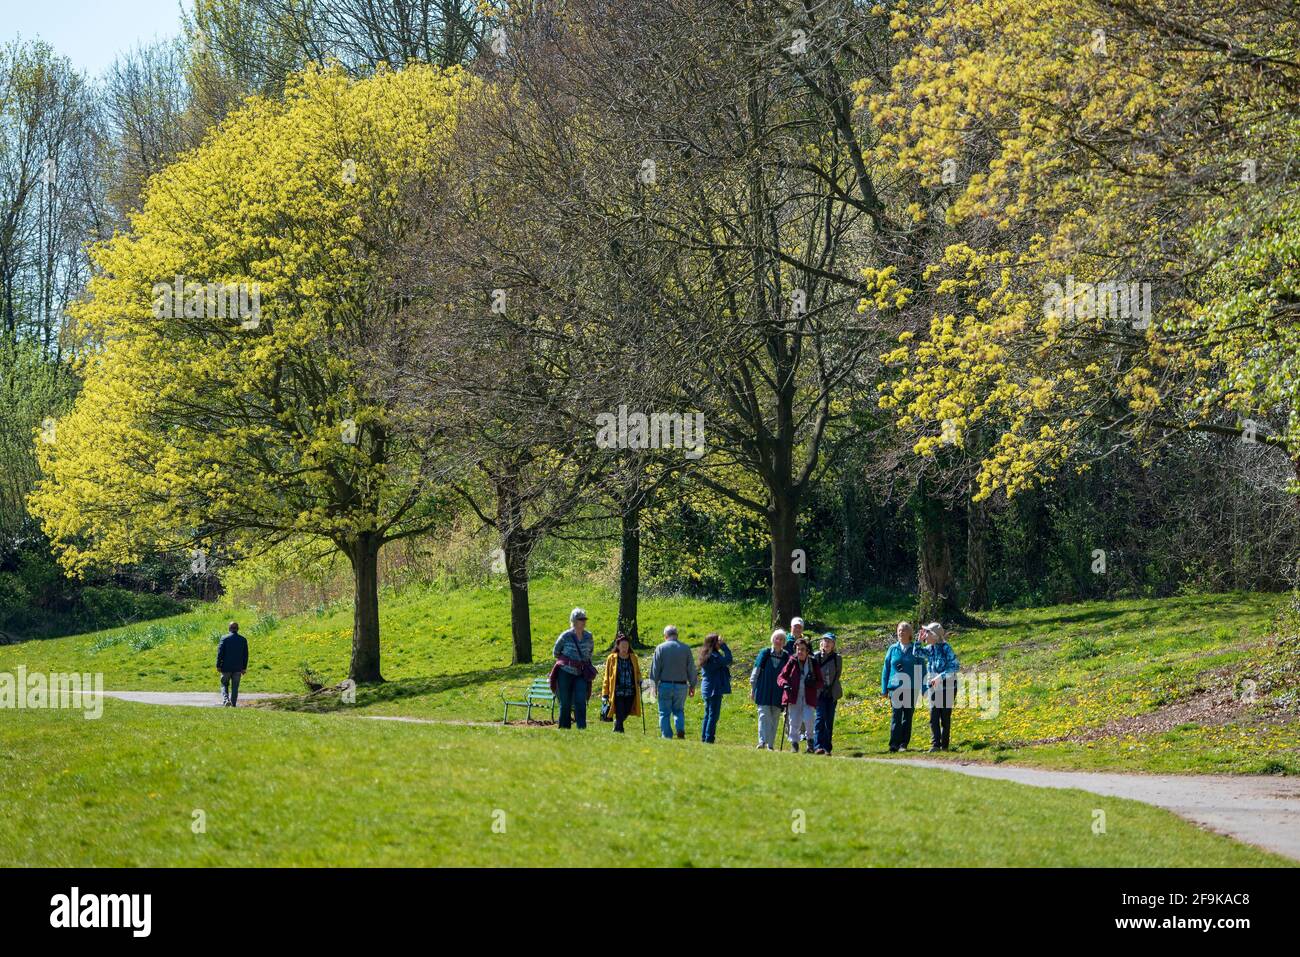 Day out in the park for these pensioners as lockdown is released. Stock Photo